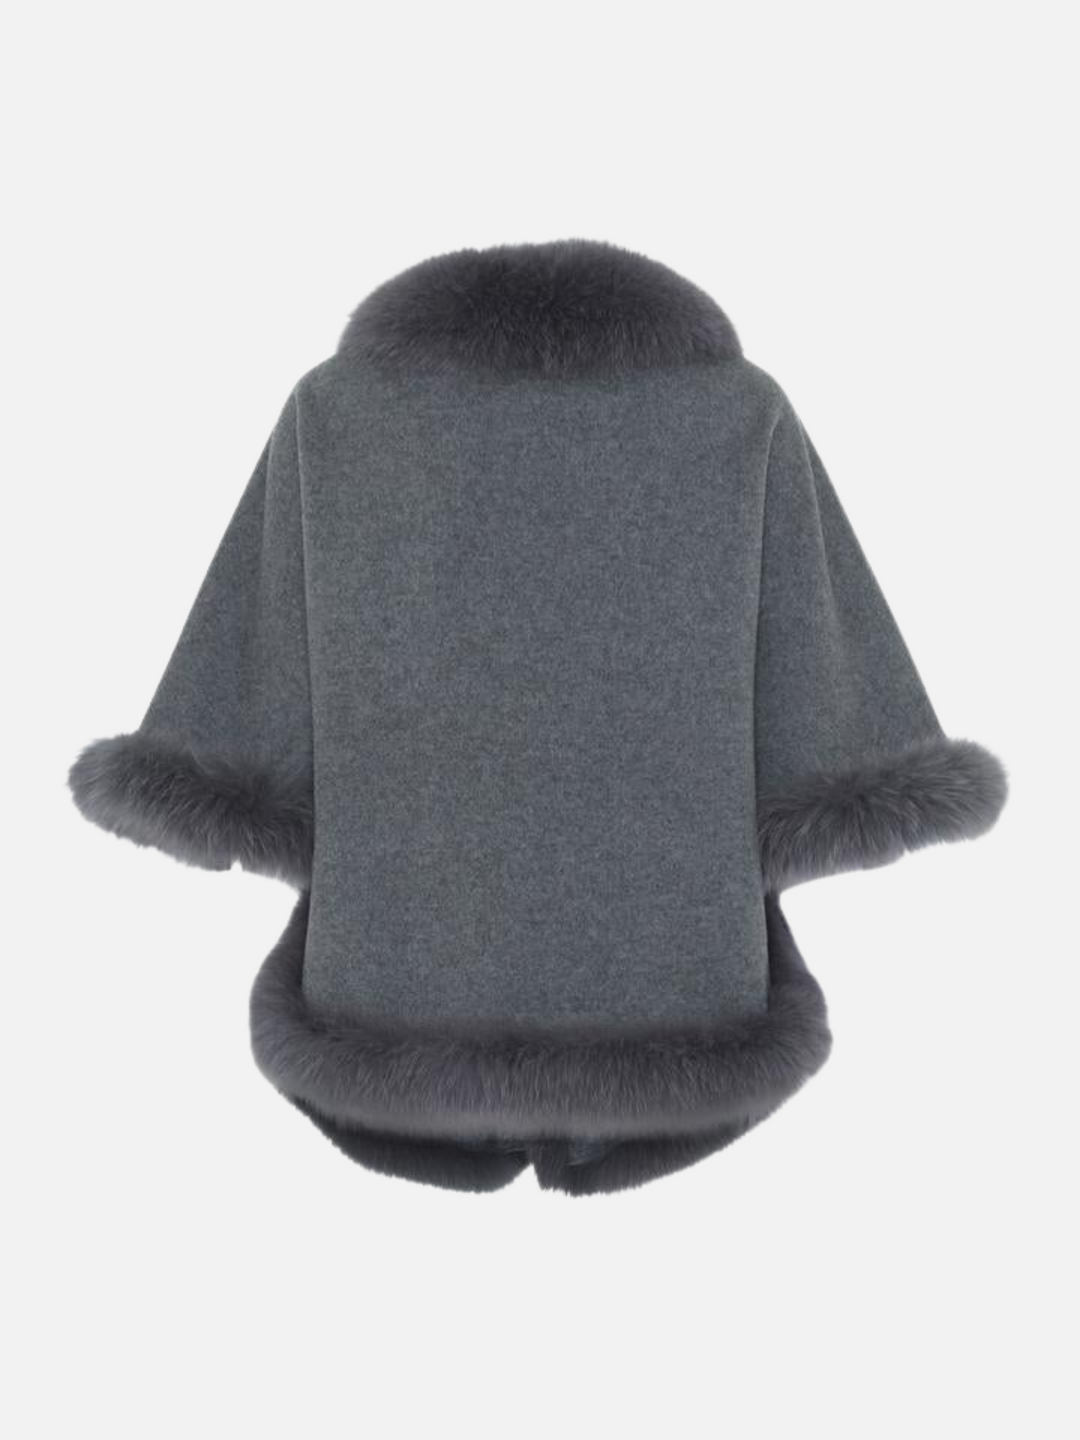 Chadron Cape, 65 cm. - Thinner Double Face Wool - Grey